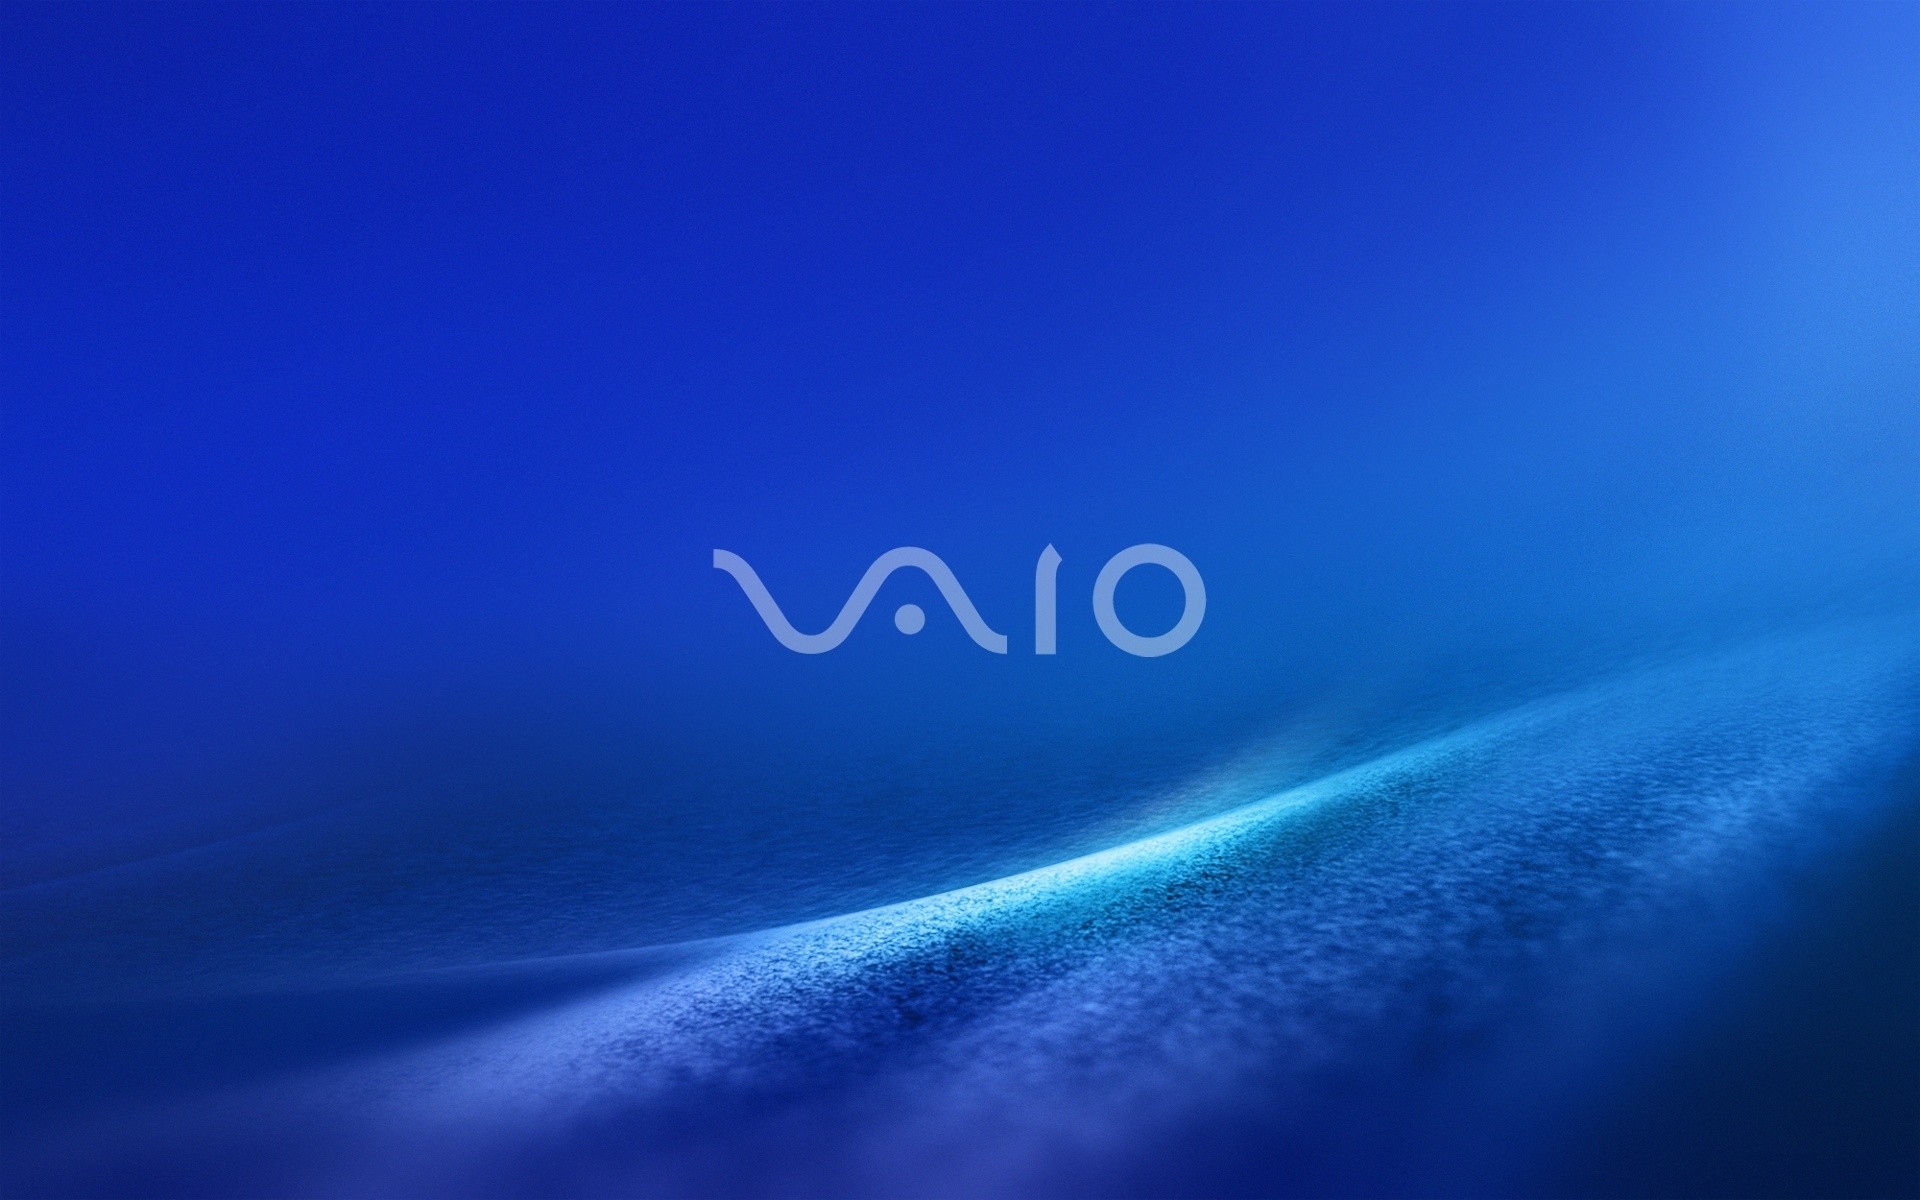 sony abstract light art blur wallpaper bright shining smooth nature turquoise desktop artistic color water background dark illustration graphic sony vaio